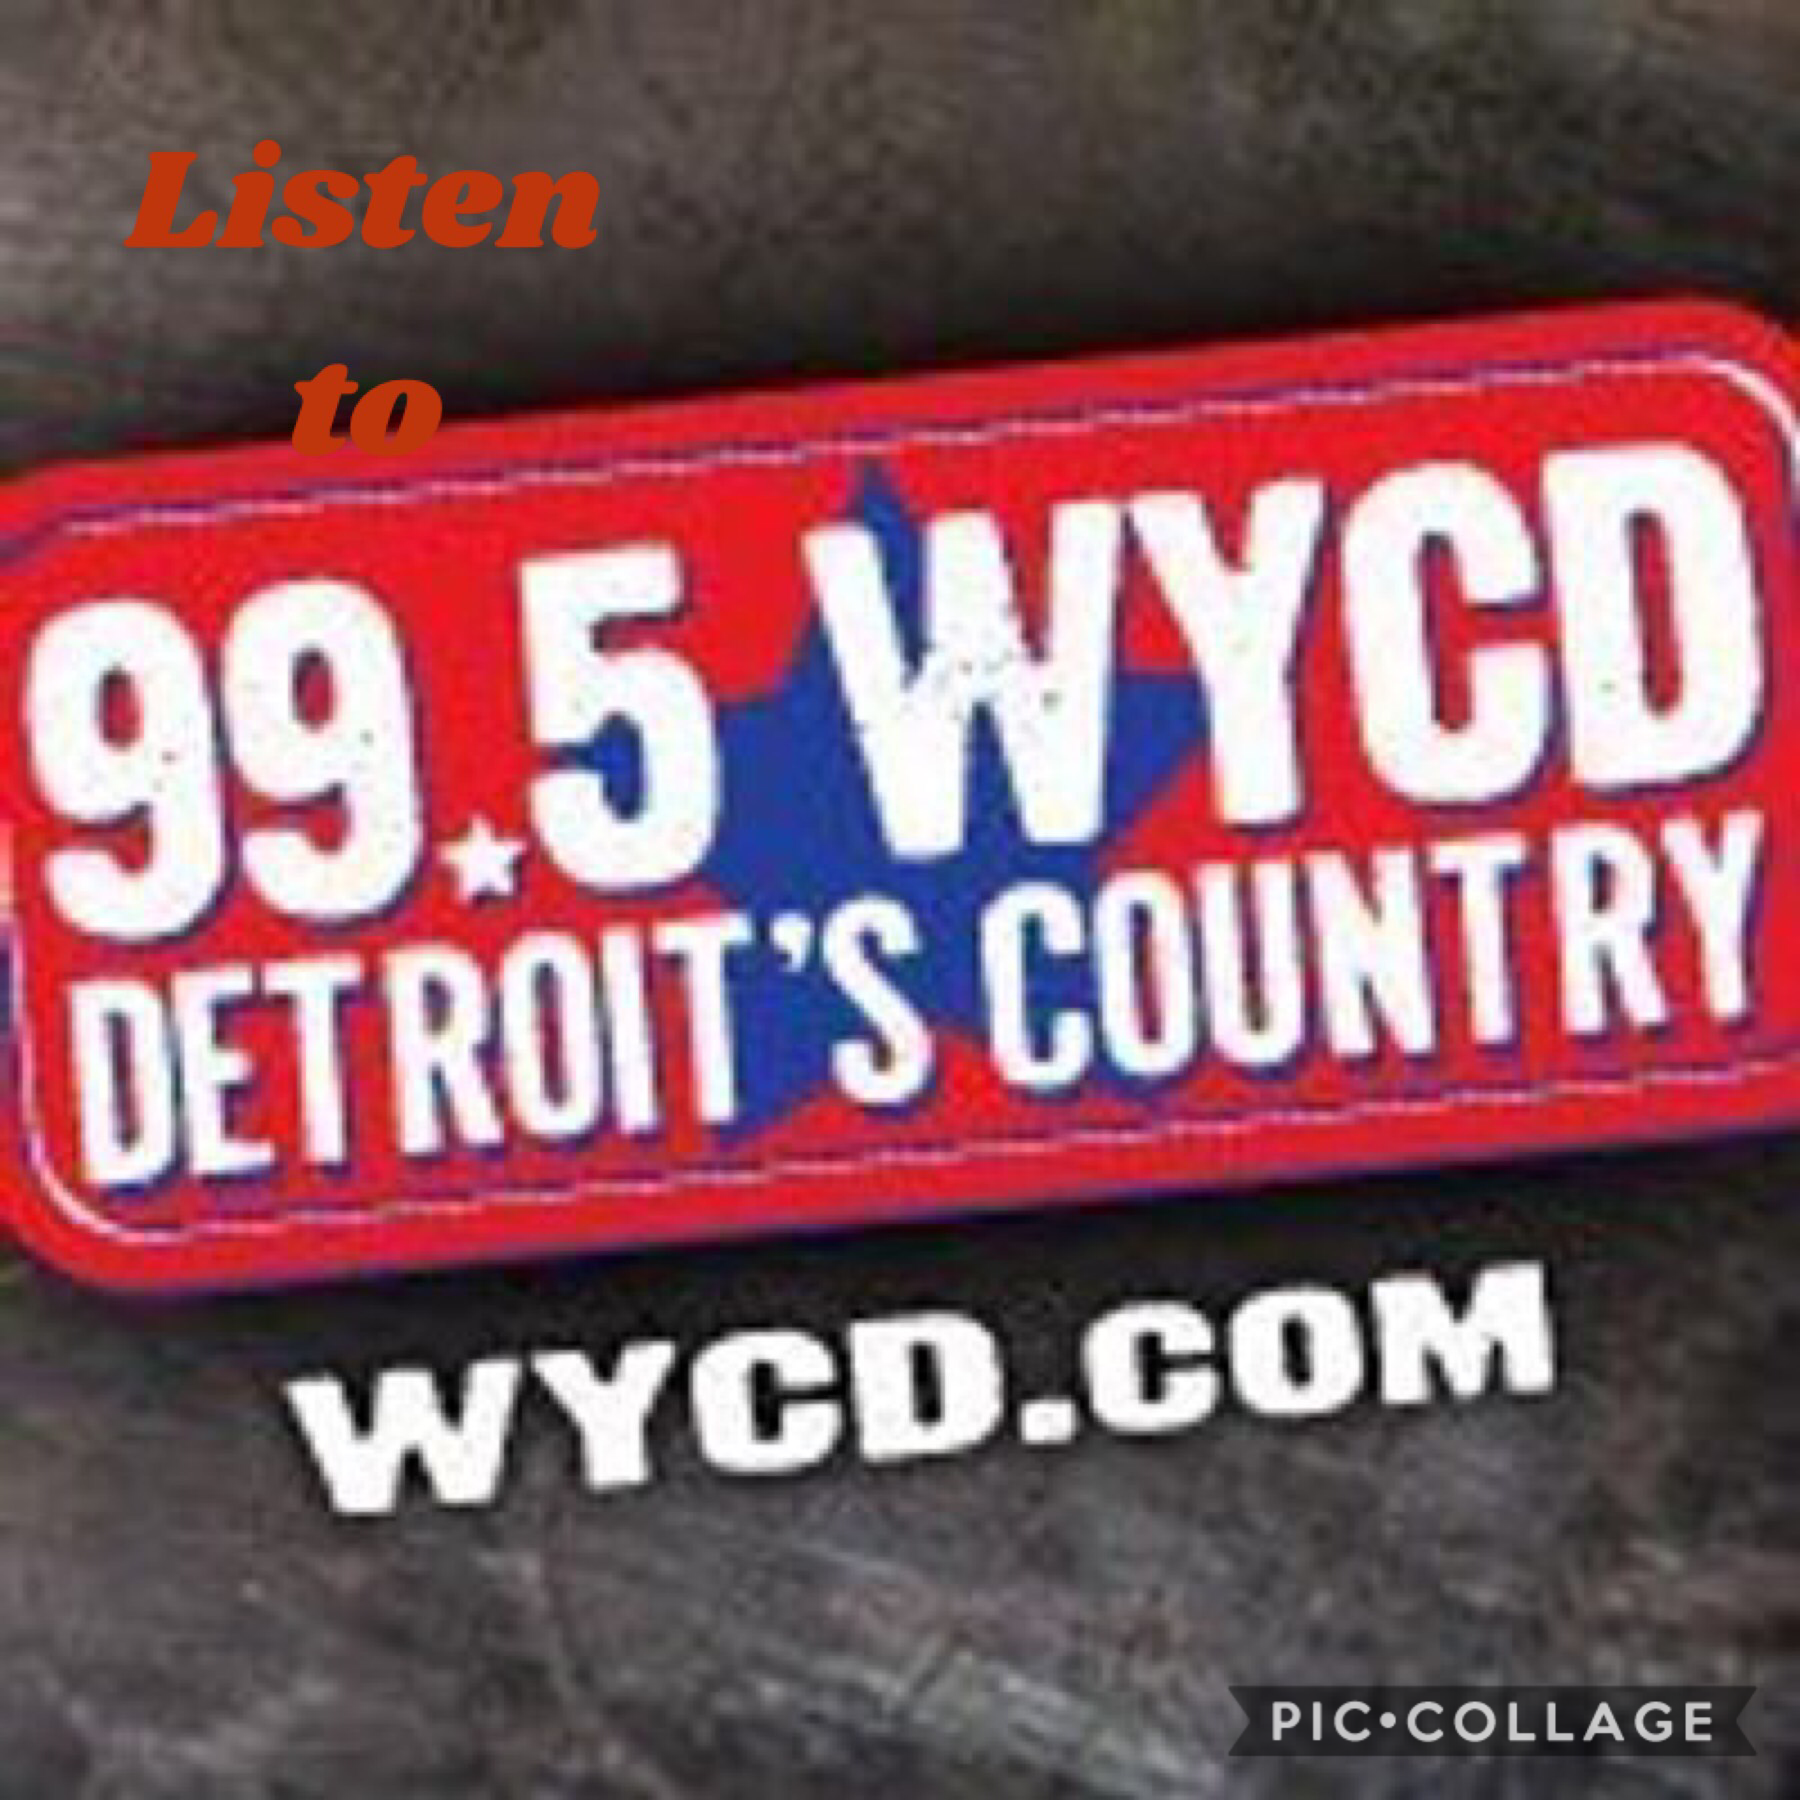 Listen to this country station on FM 